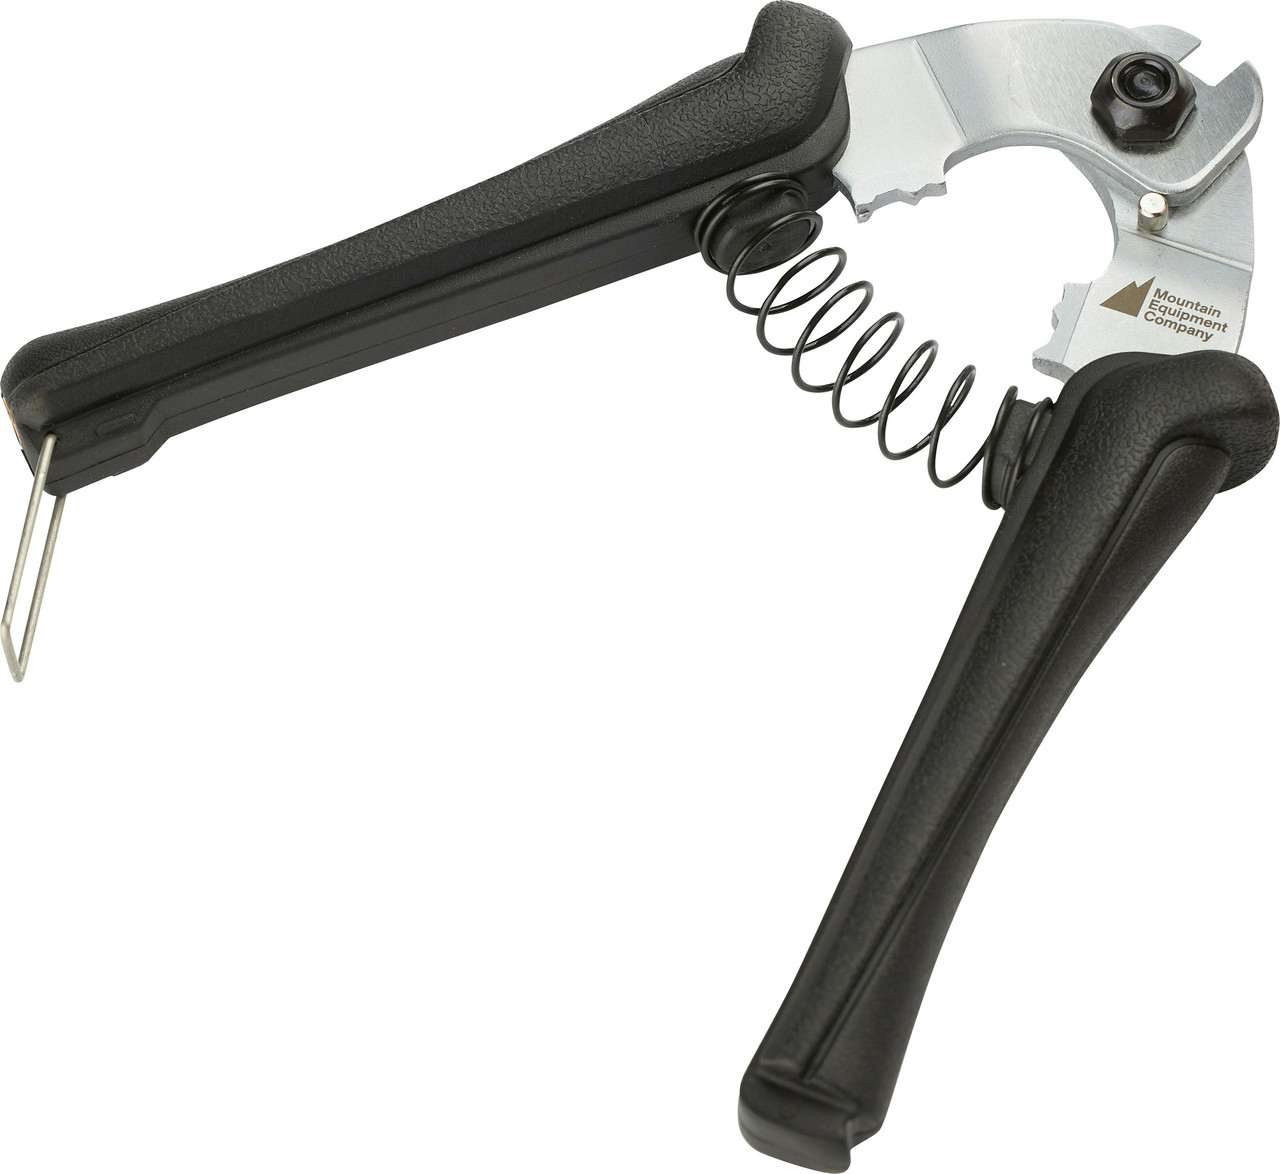 Cable Cutter Tool Black